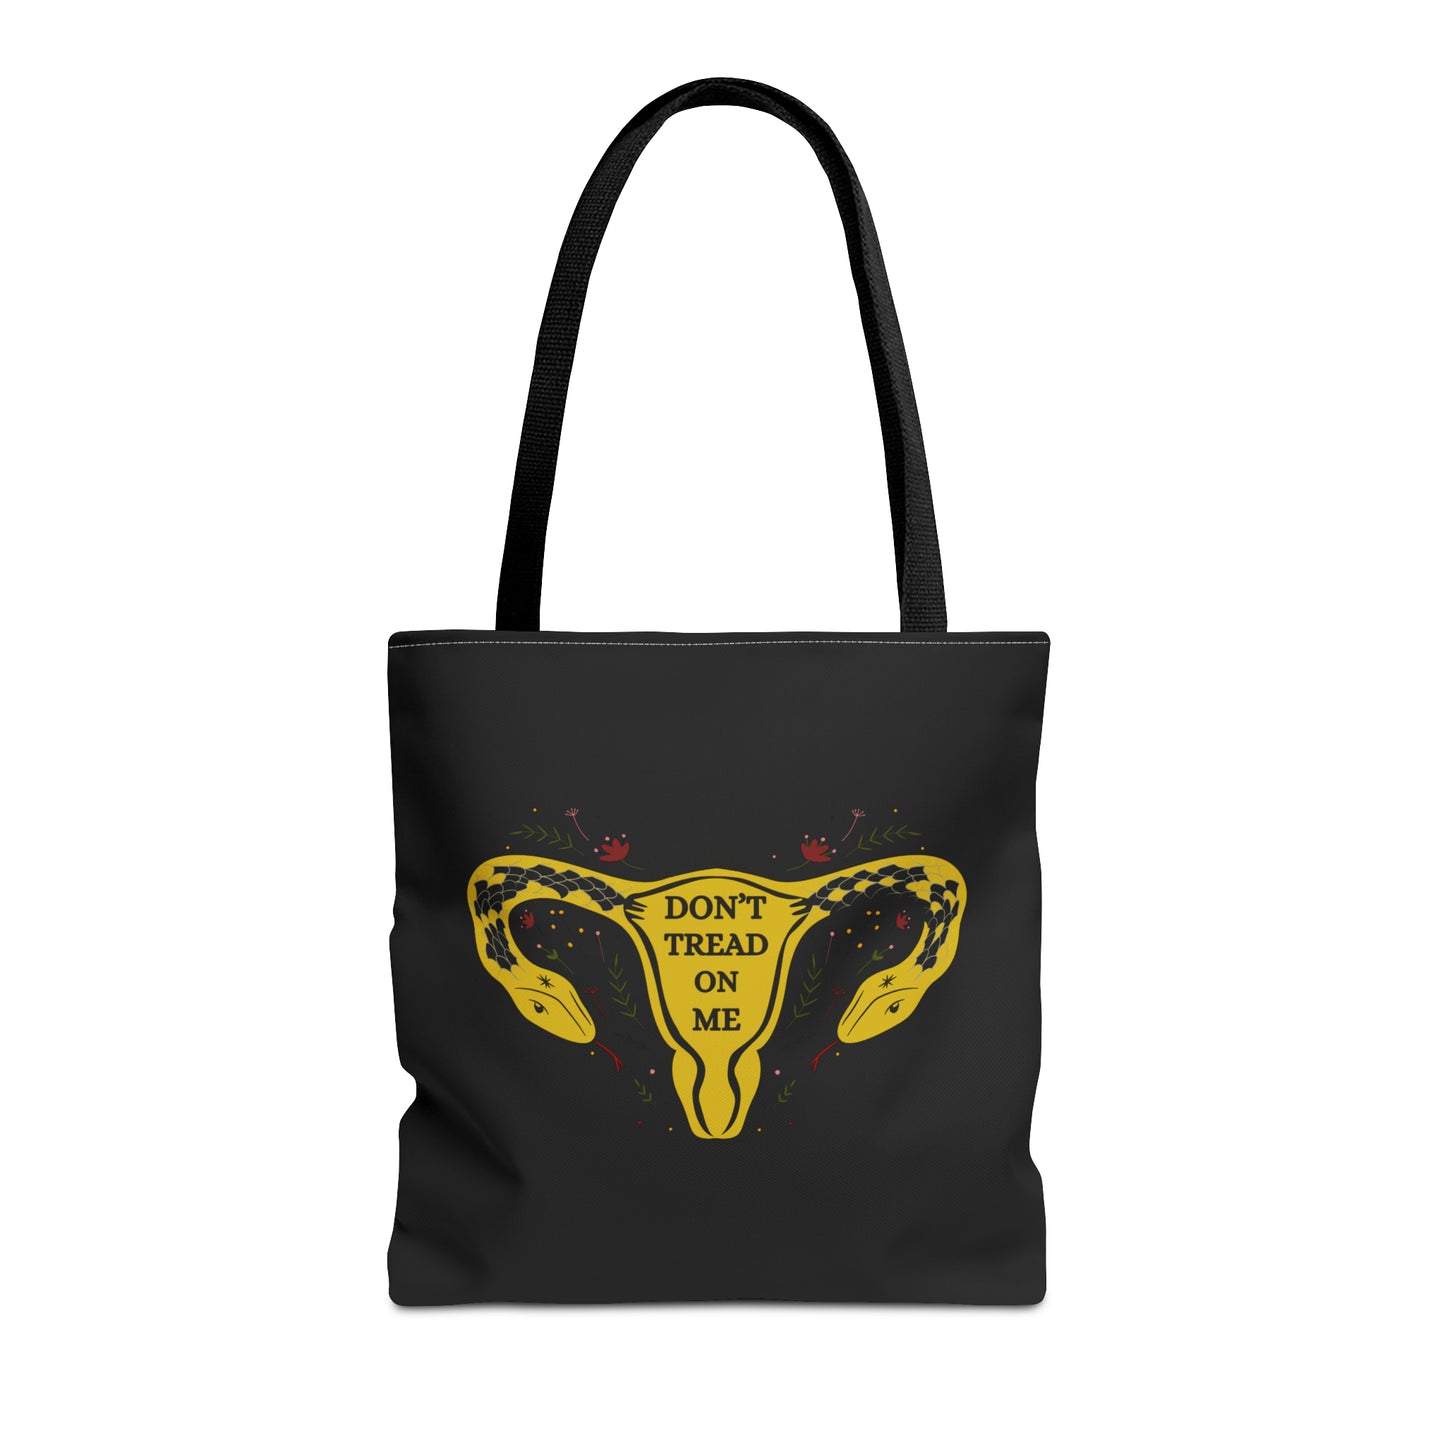 "Don't Tread on Me" - Tote Bag